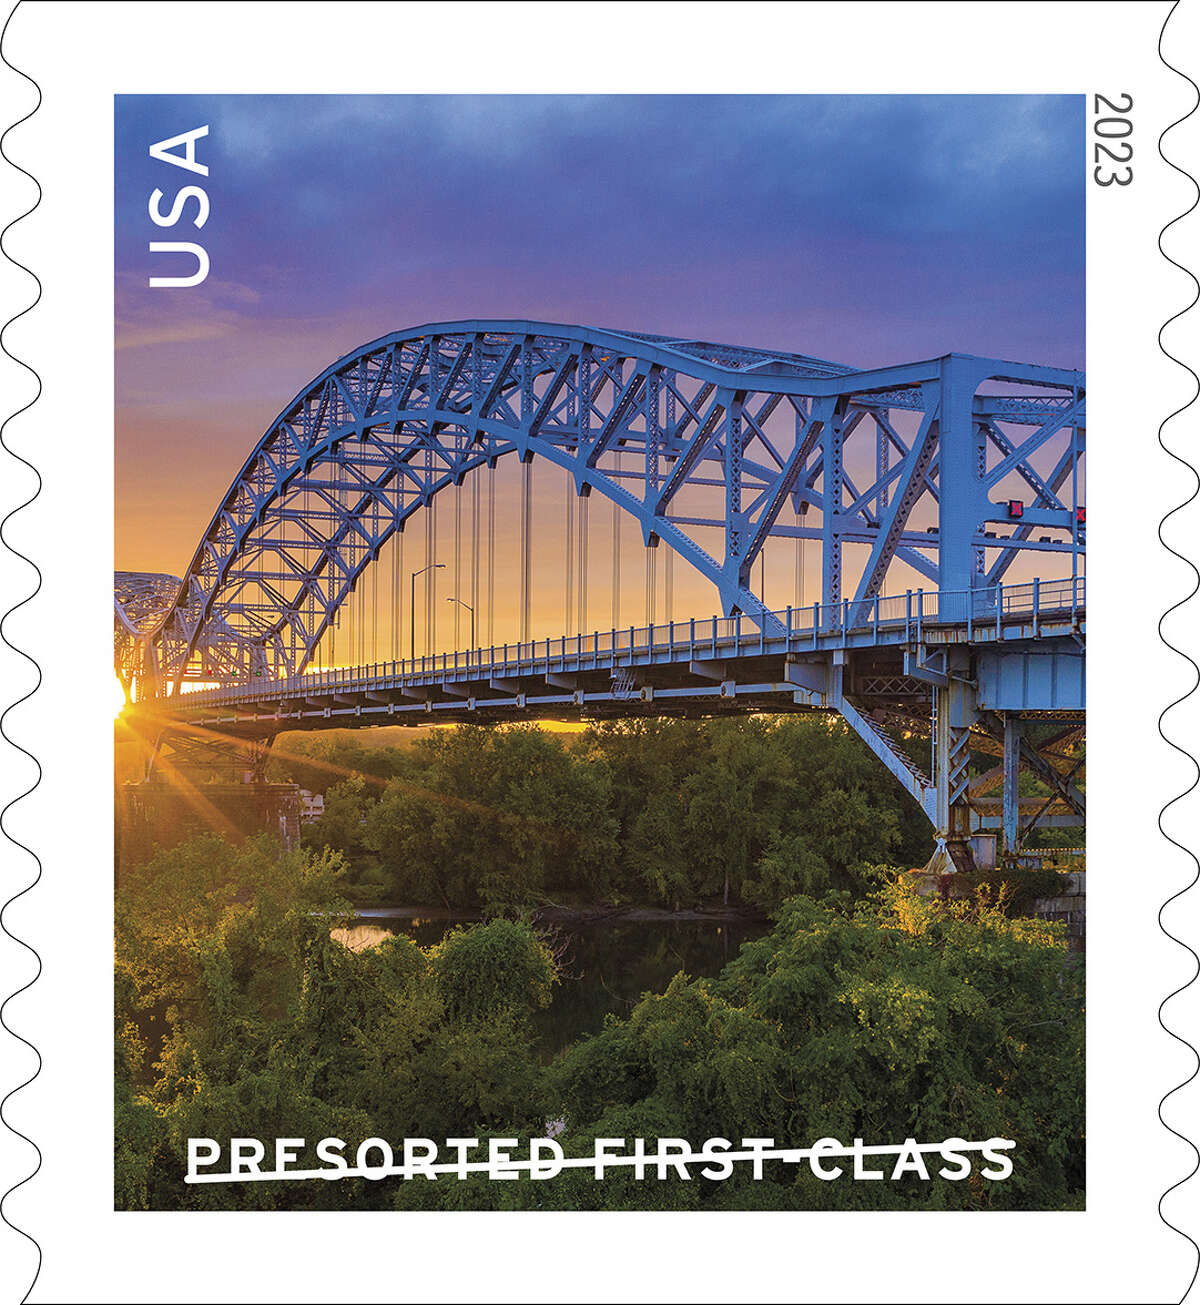 The Arrigoni Bridge, which runs over the Connecticut River and connects Portland and Middletown, is the subject of a new postage stamp.